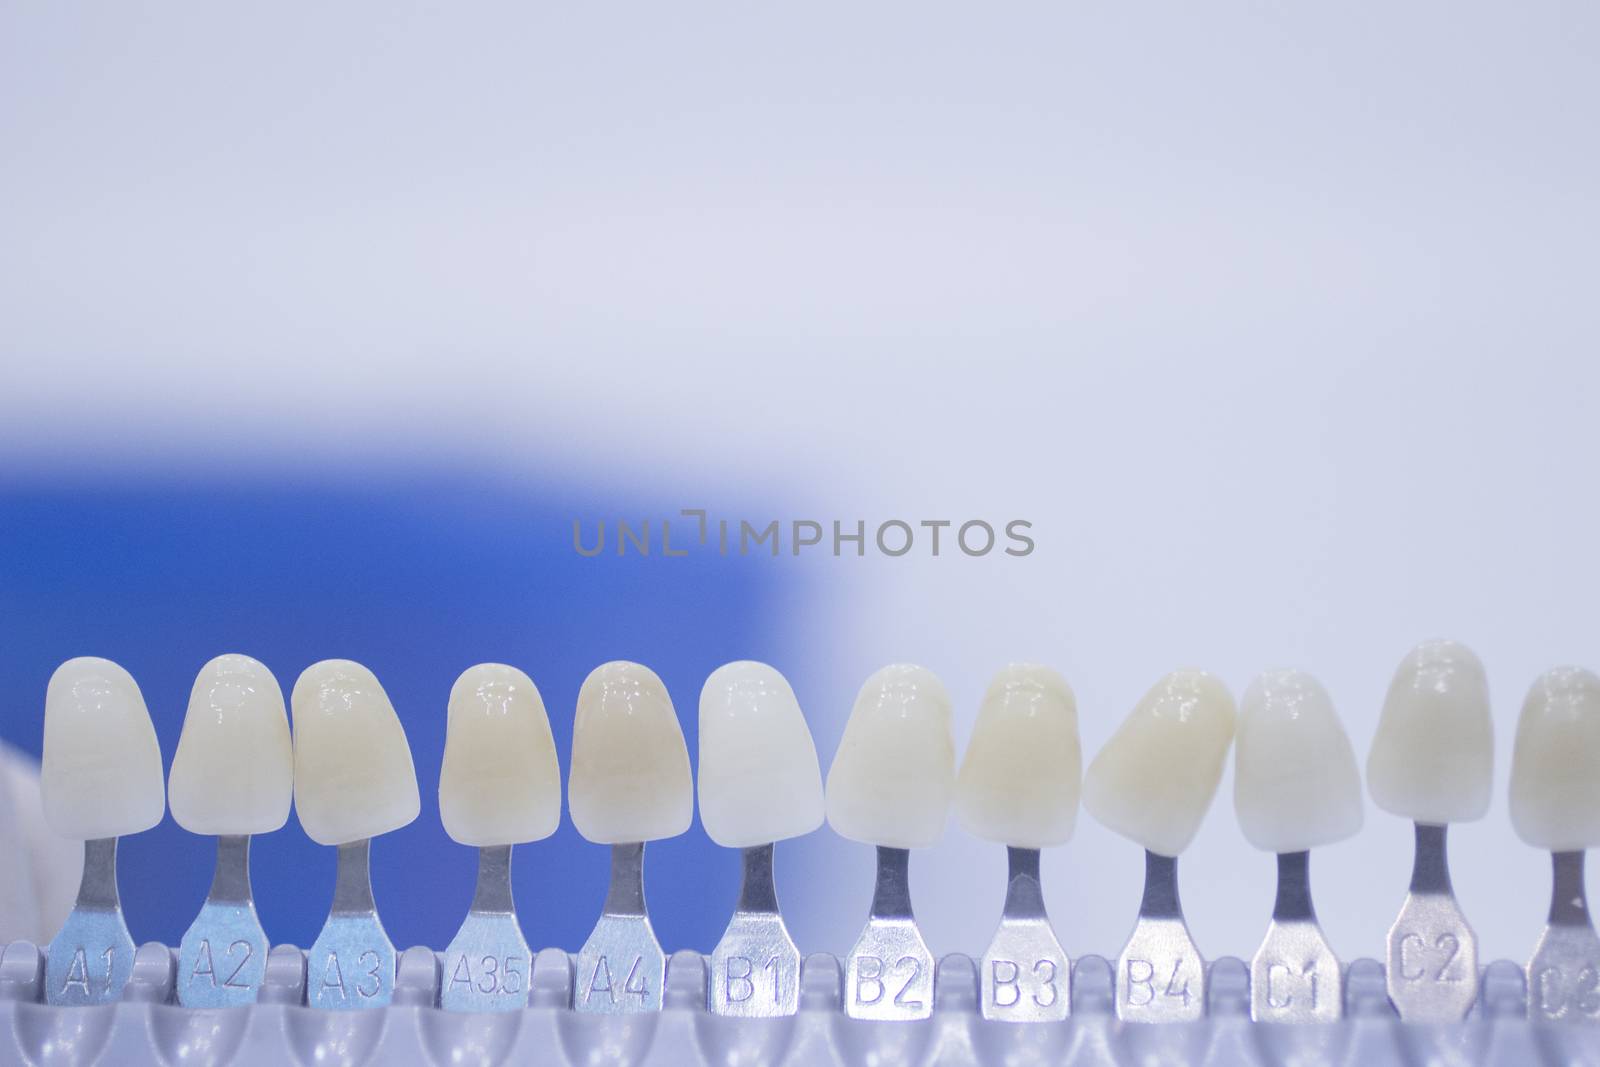 Dental tooth color guide for implants and crown colors by edwardolive